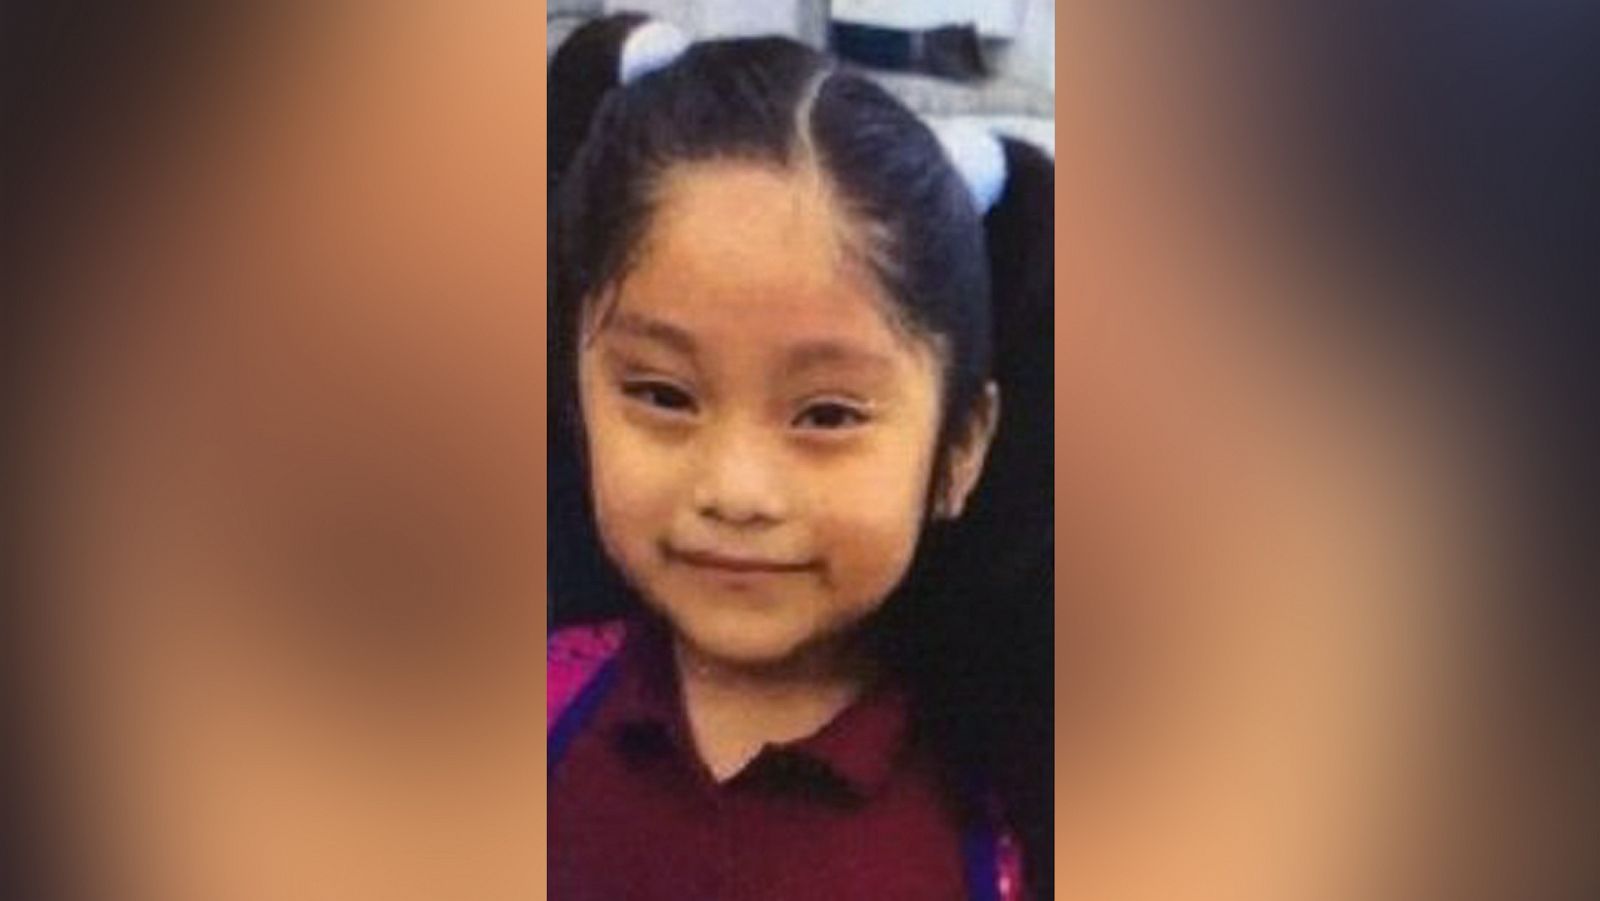 Amber Alert issued for 5-year-old girl who police say was lured into a van  - ABC News